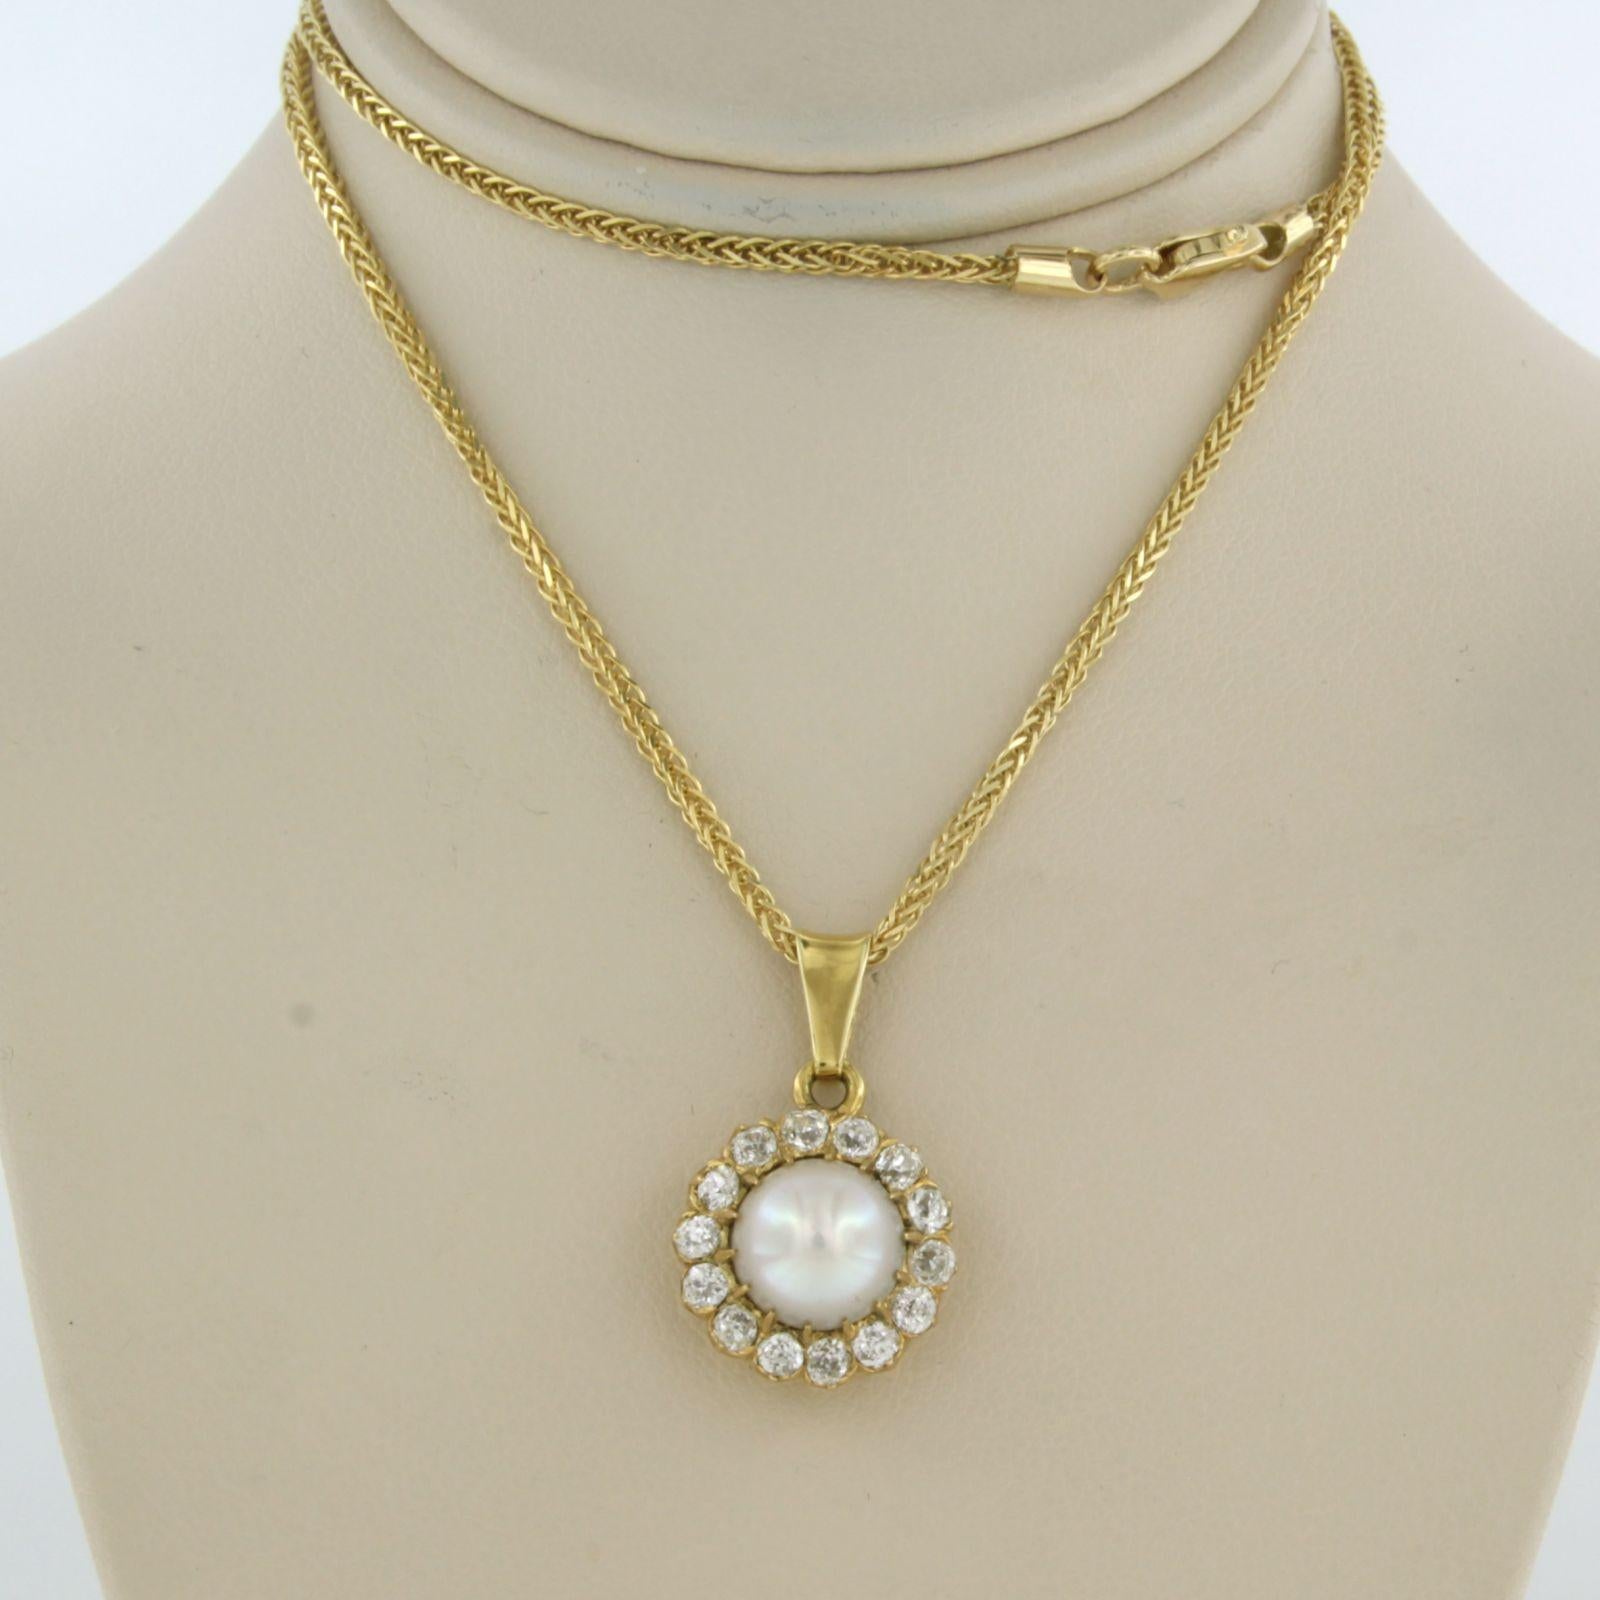 14k yellow gold necklace with entourage pendant set with pearl and old mine cut diamond. 0.70ct - G/H - SI - 40 cm long

detailed description:

the necklace is 40 cm long and 1.1 mm wide

the pendant is 2.2 cm high and 1.3 cm wide

weight: 6.8